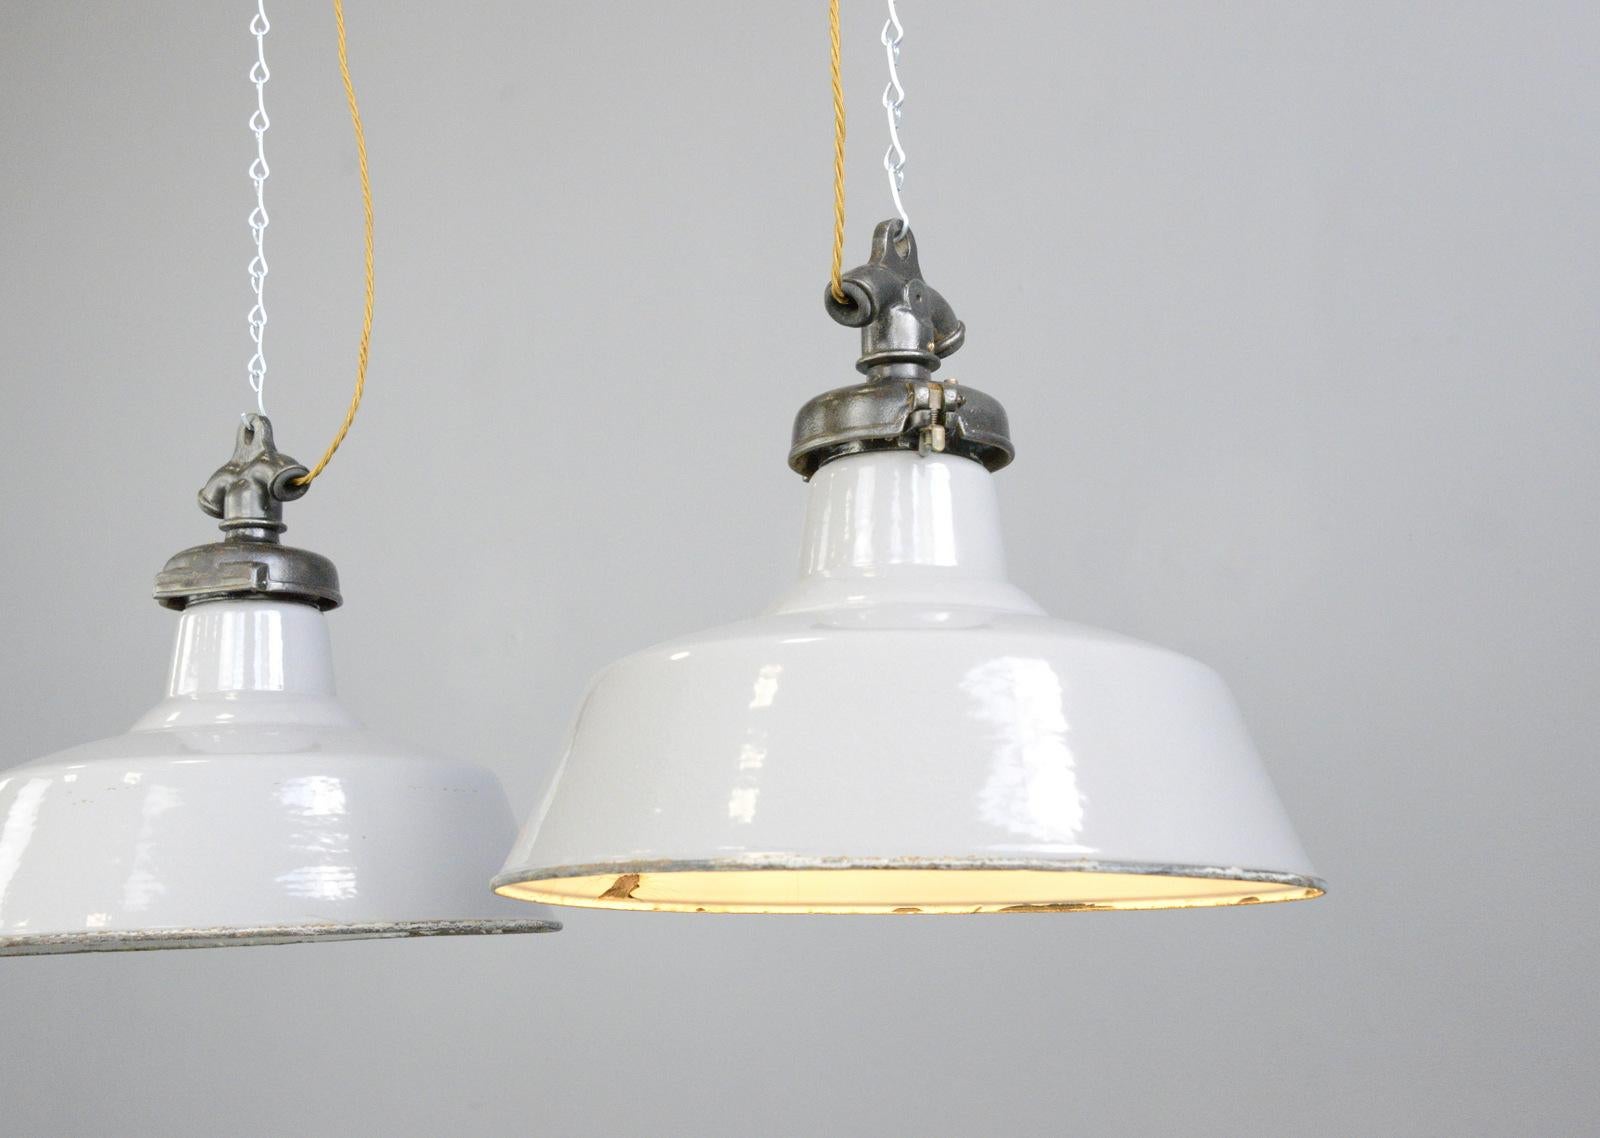 Grey enamel factory lights by Credalux, circa 1930s

- Price is per light (2 available)
- Vitreous grey enamel shades
- Cast iron tops
- Takes E27 fitting bulbs
- Made by Credenda Simplex, Oldbury
- Salvaged from the England's Glory Match Factory in